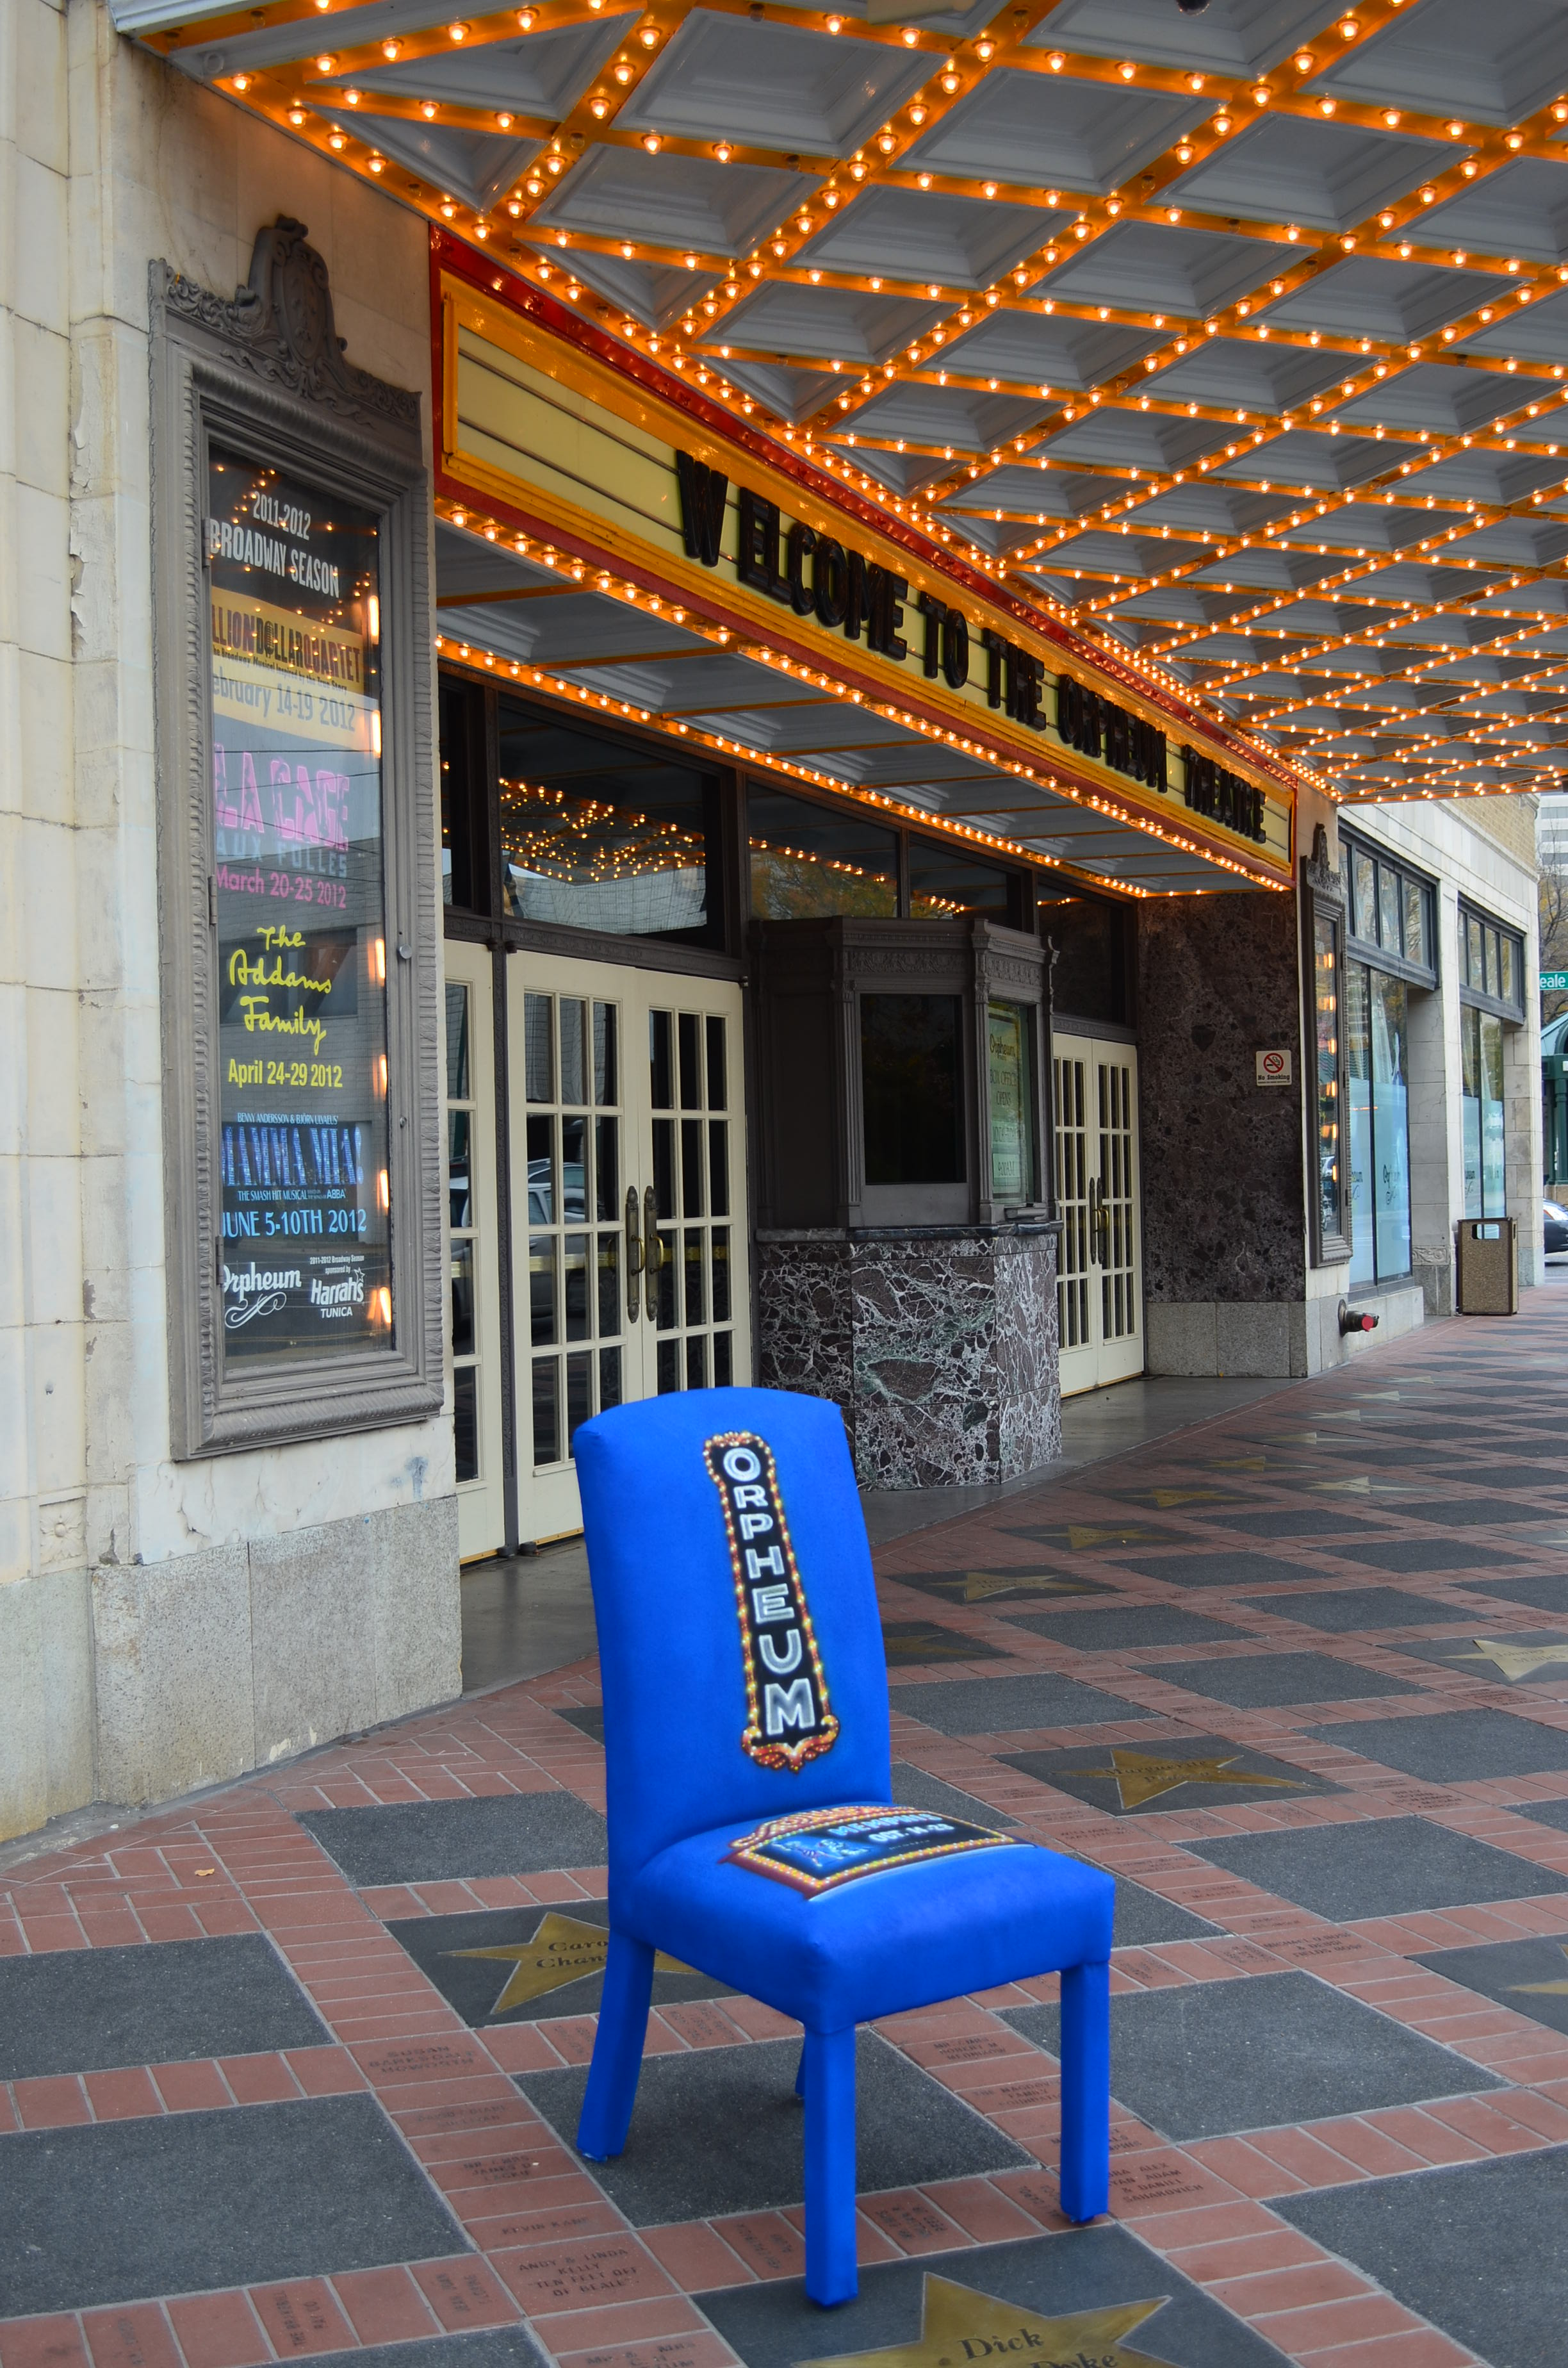 “Chair-ity” for the Orpheum